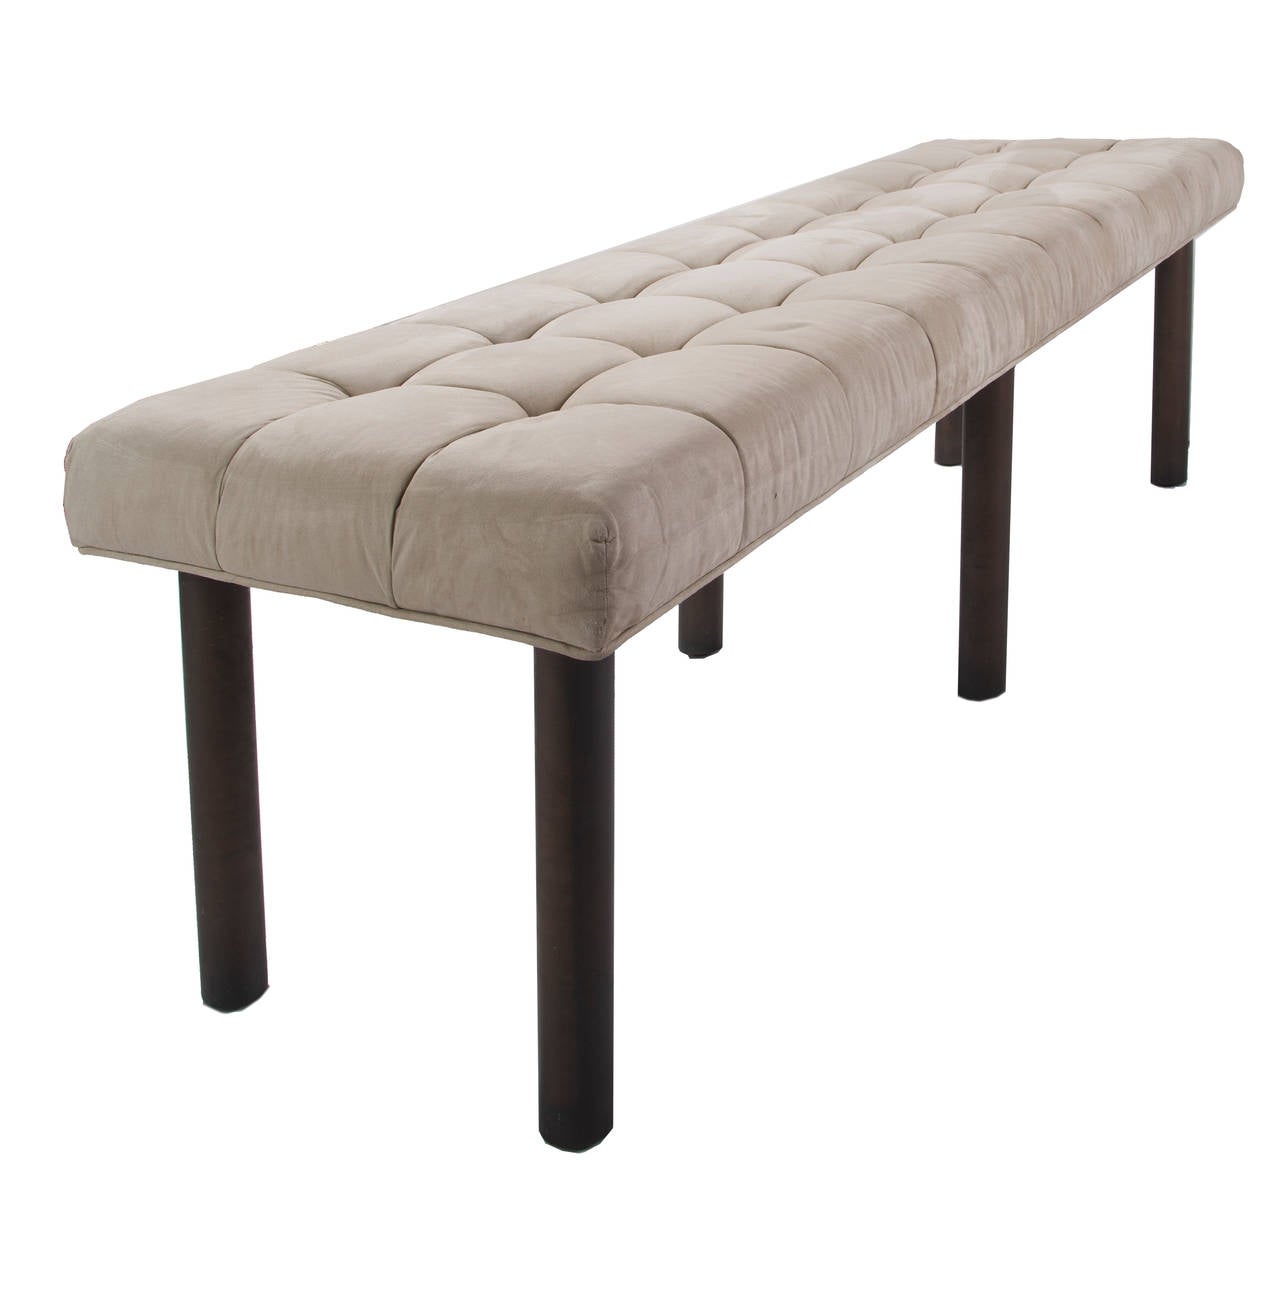 Pale gray tufted plush fabric on long rectangular stool base with six tubular industrial style metal legs. Nicely completed with metal designer feet bottoms.